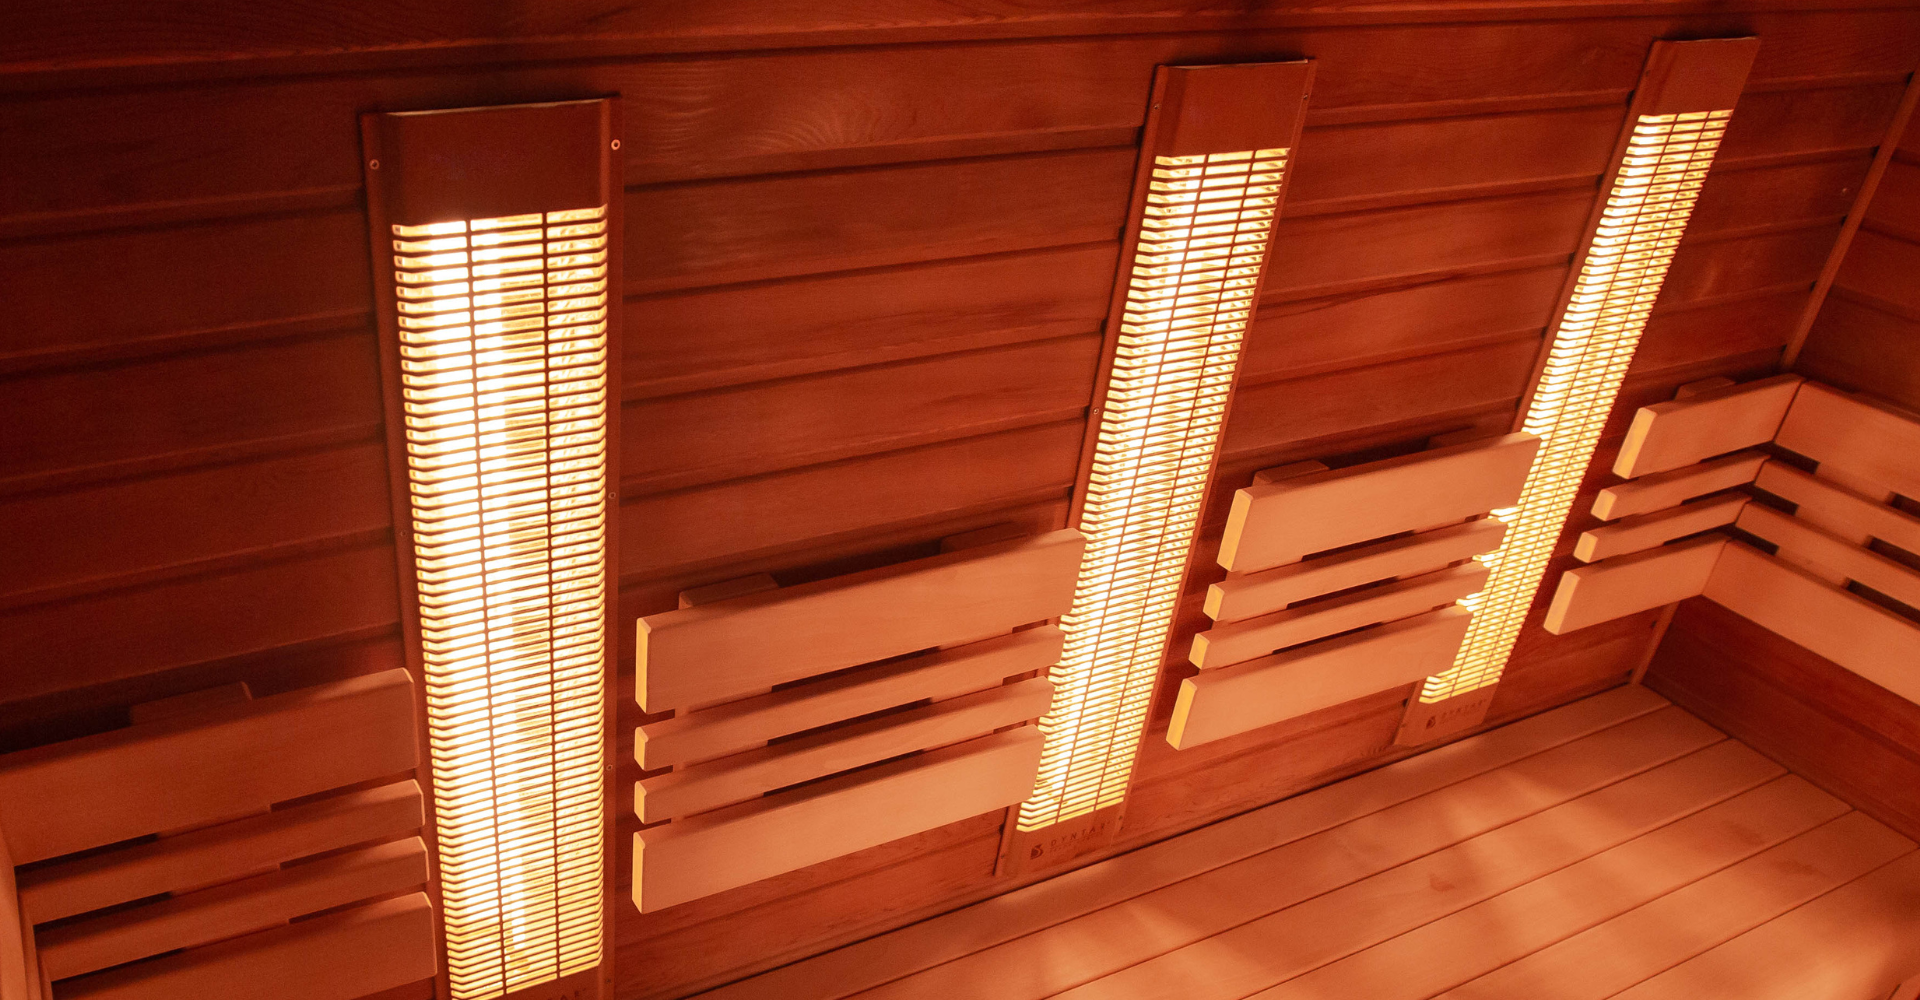 Infrared Sauna Buyers Guide: What To Look For When Buying A Sauna